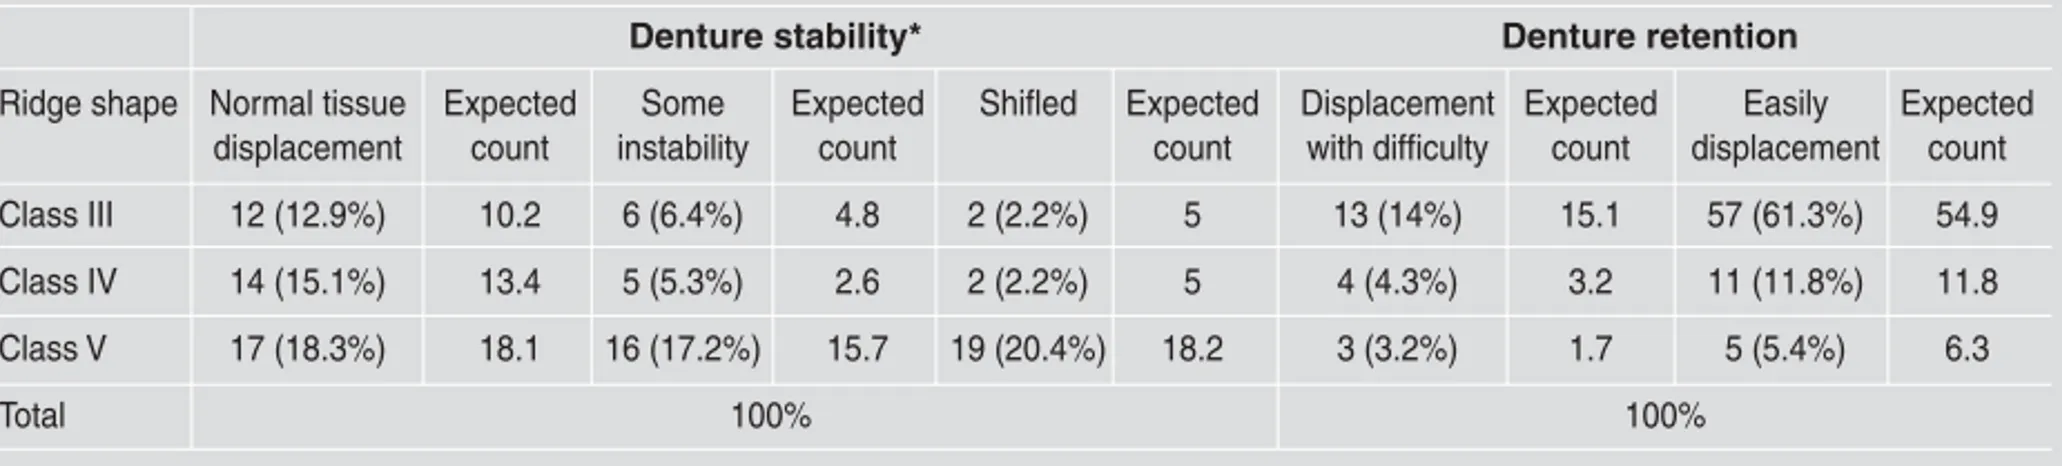 Table 2: Relationship between the shape of the mandibular ridge and denture stability and retention.